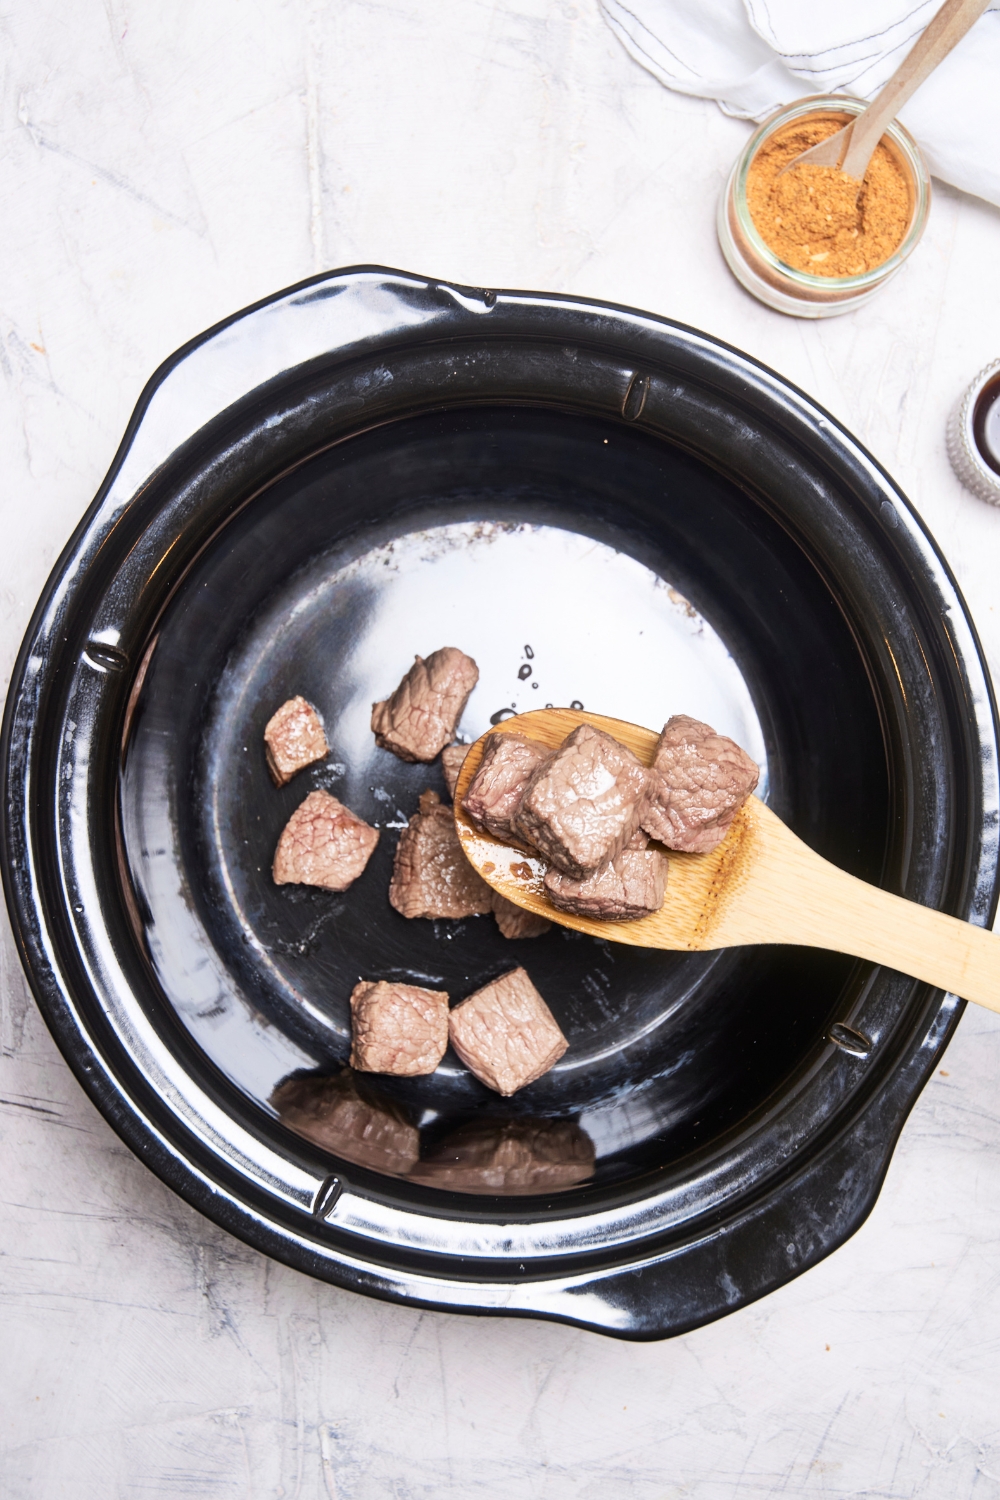 Someone spoons beef into the crock pot using a wooden spoon. A jar of seasoning is near by.